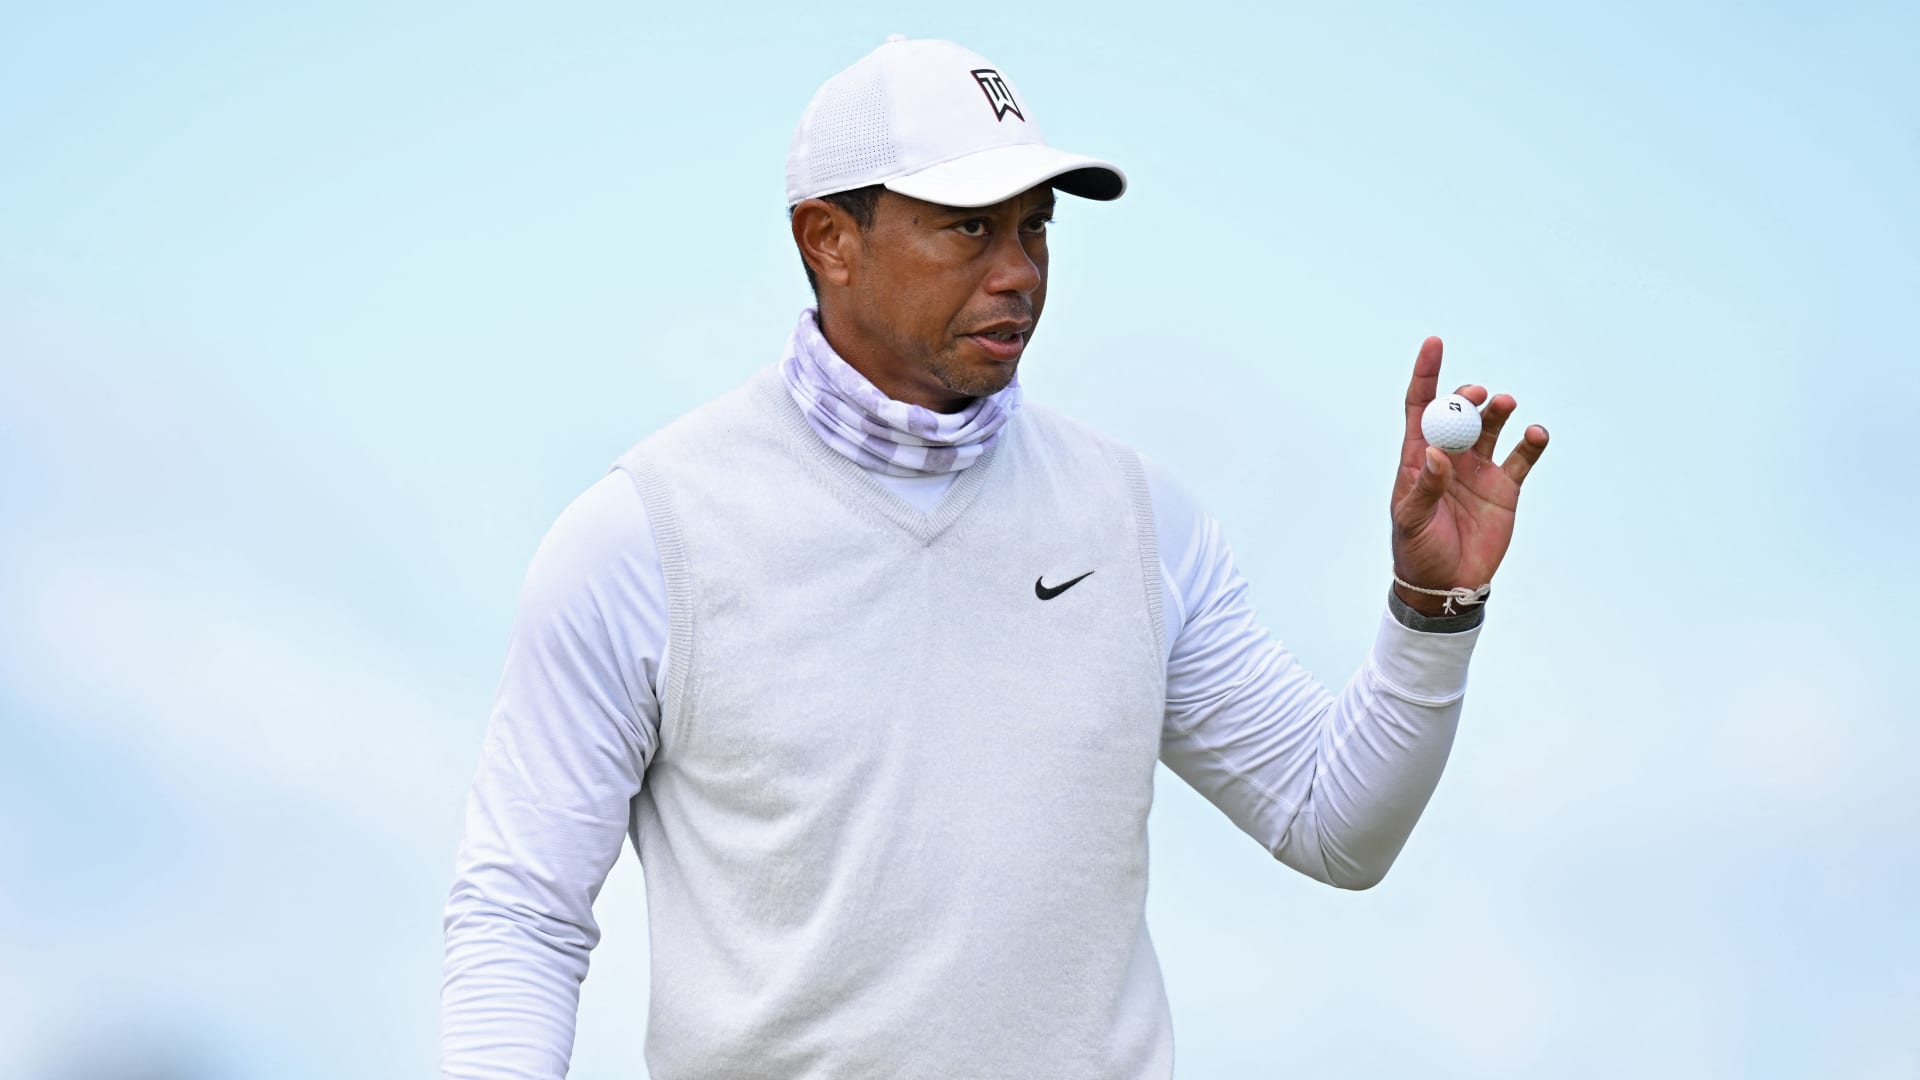 US golfer Tiger Woods reacts on the 9th green during his second round on the day 2 of The 150th British Open Golf Championship on The Old Course at St Andrews in Scotland on July 15, 2022.